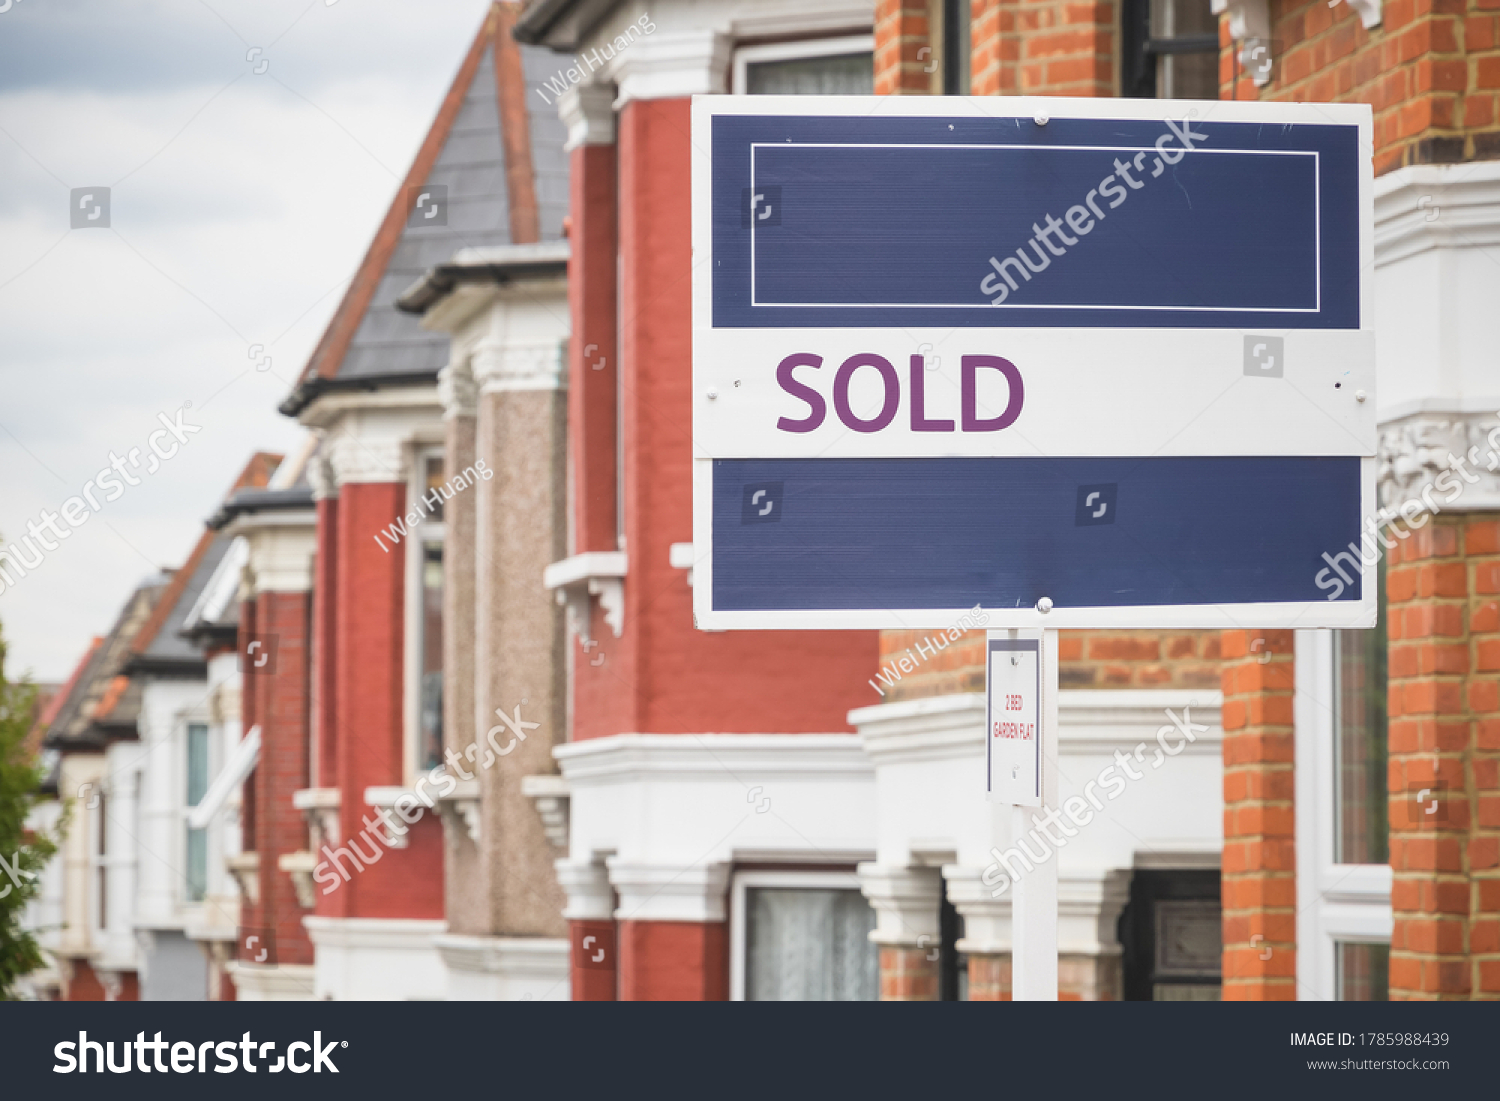 25,759 Property sold sign Images, Stock Photos & Vectors | Shutterstock